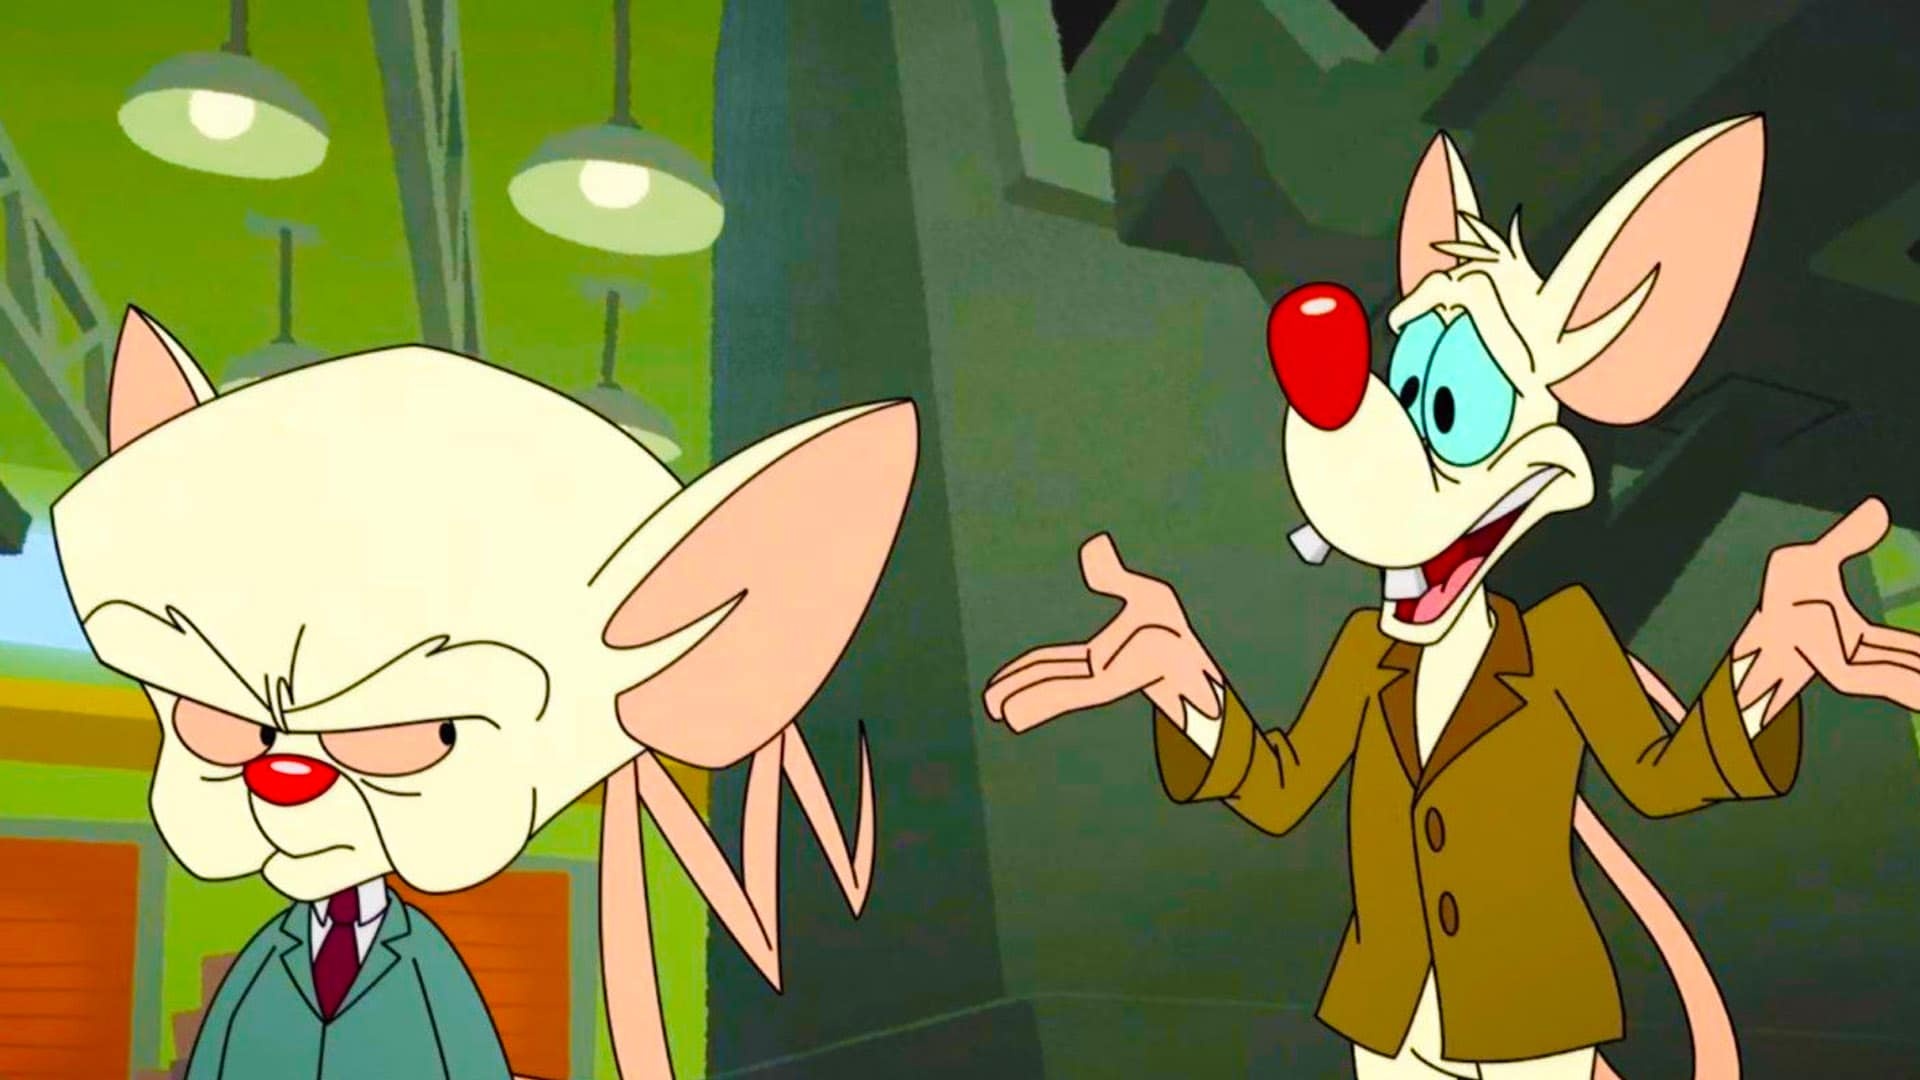 Pinky and the Brain wallpaper, Cartoon duo, Classic animation, Animated series, 1920x1080 Full HD Desktop